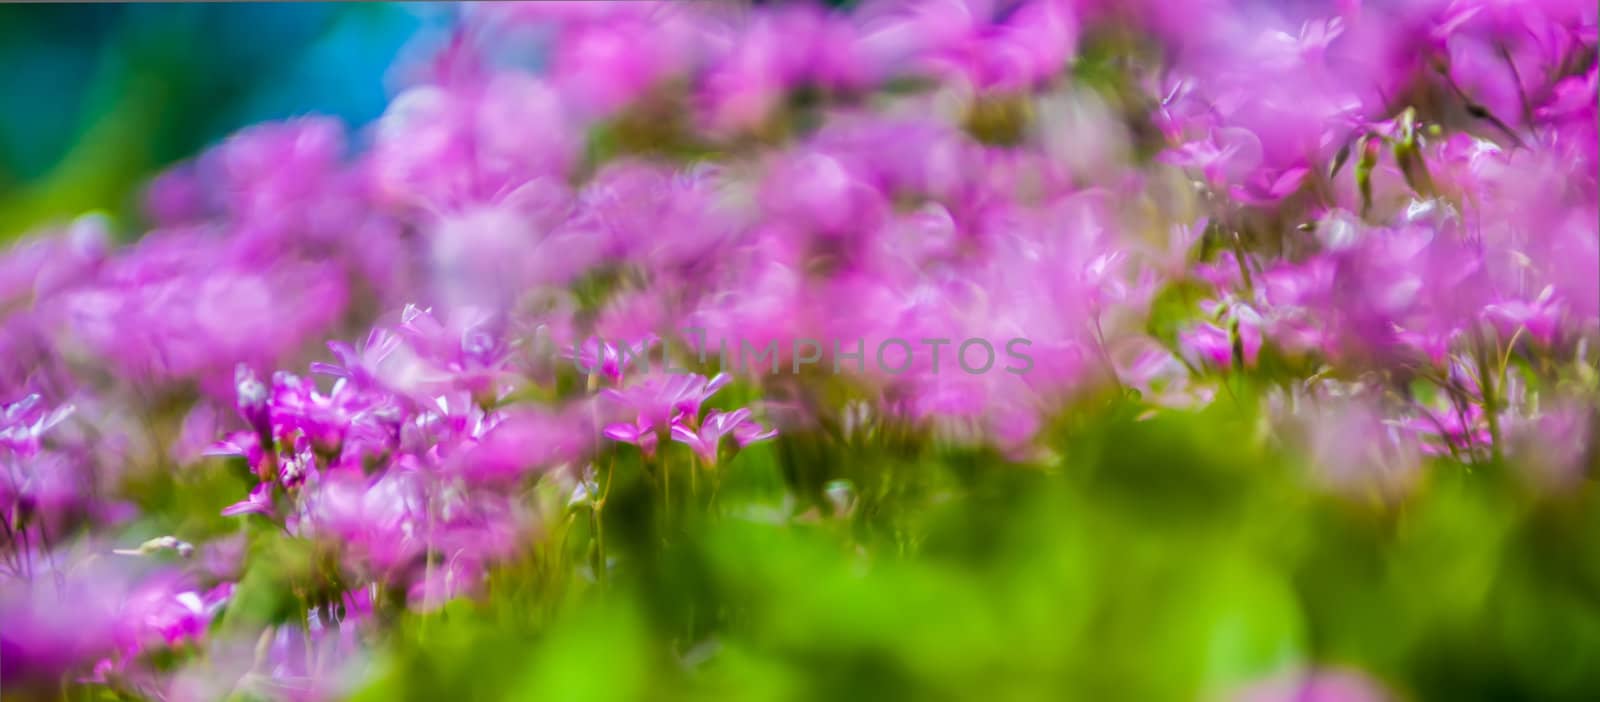 abstract Blurry pink flower background for backgrounds